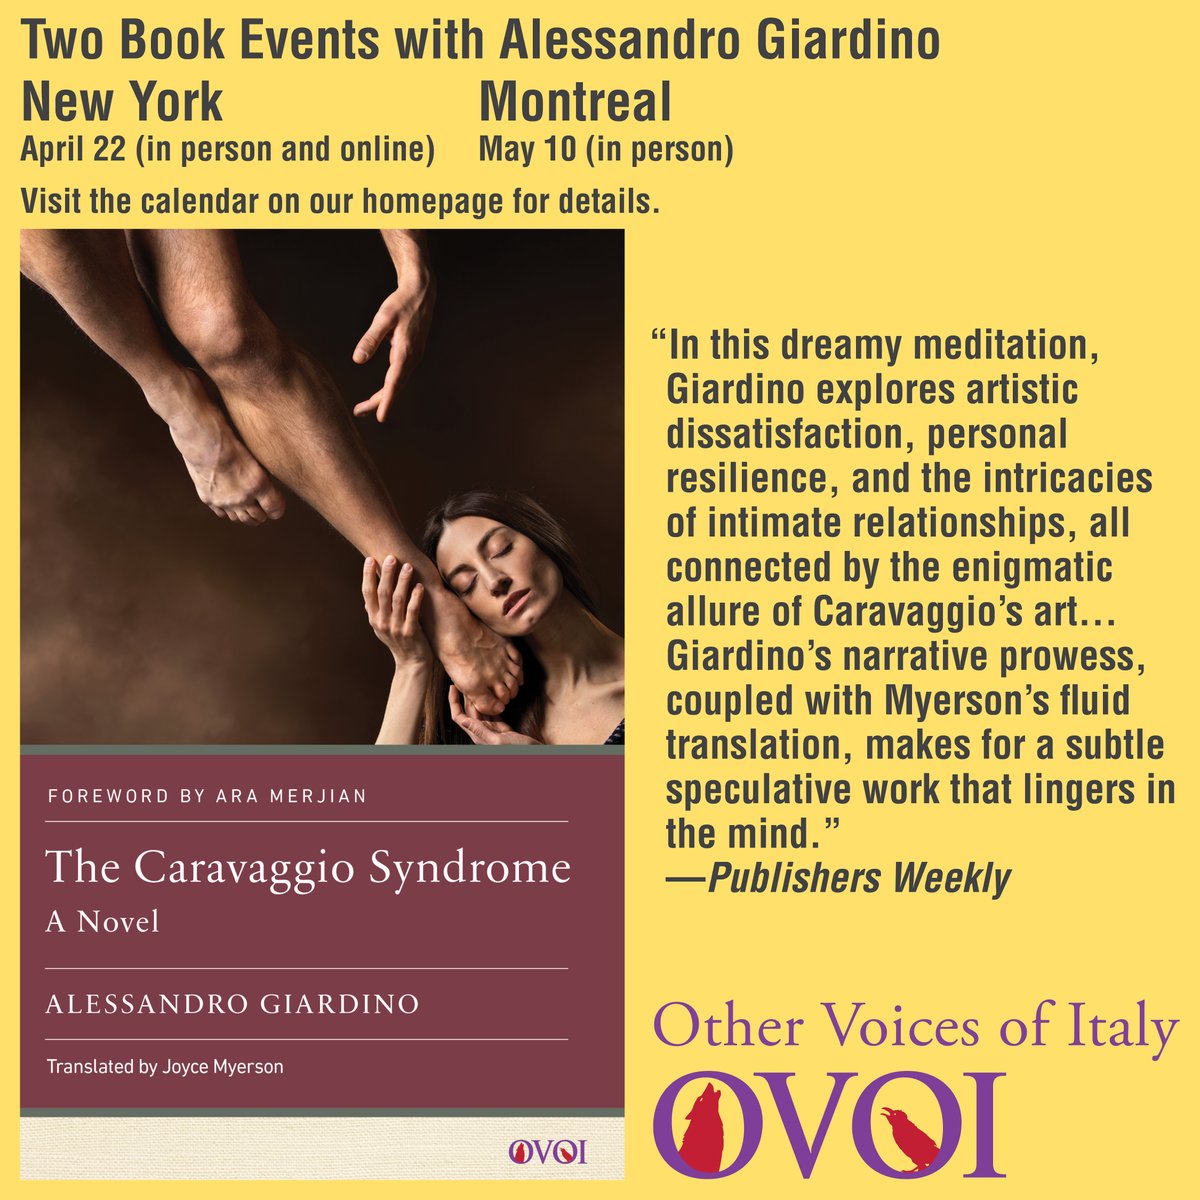 Two events with Alessandro Giardino, author of 'The Caravaggio Syndrome: A Novel' in New York and Montreal. Visit the calendar on our website homepage for more details. rutgersuniversitypress.org/the-caravaggio… #ItalianLiterature